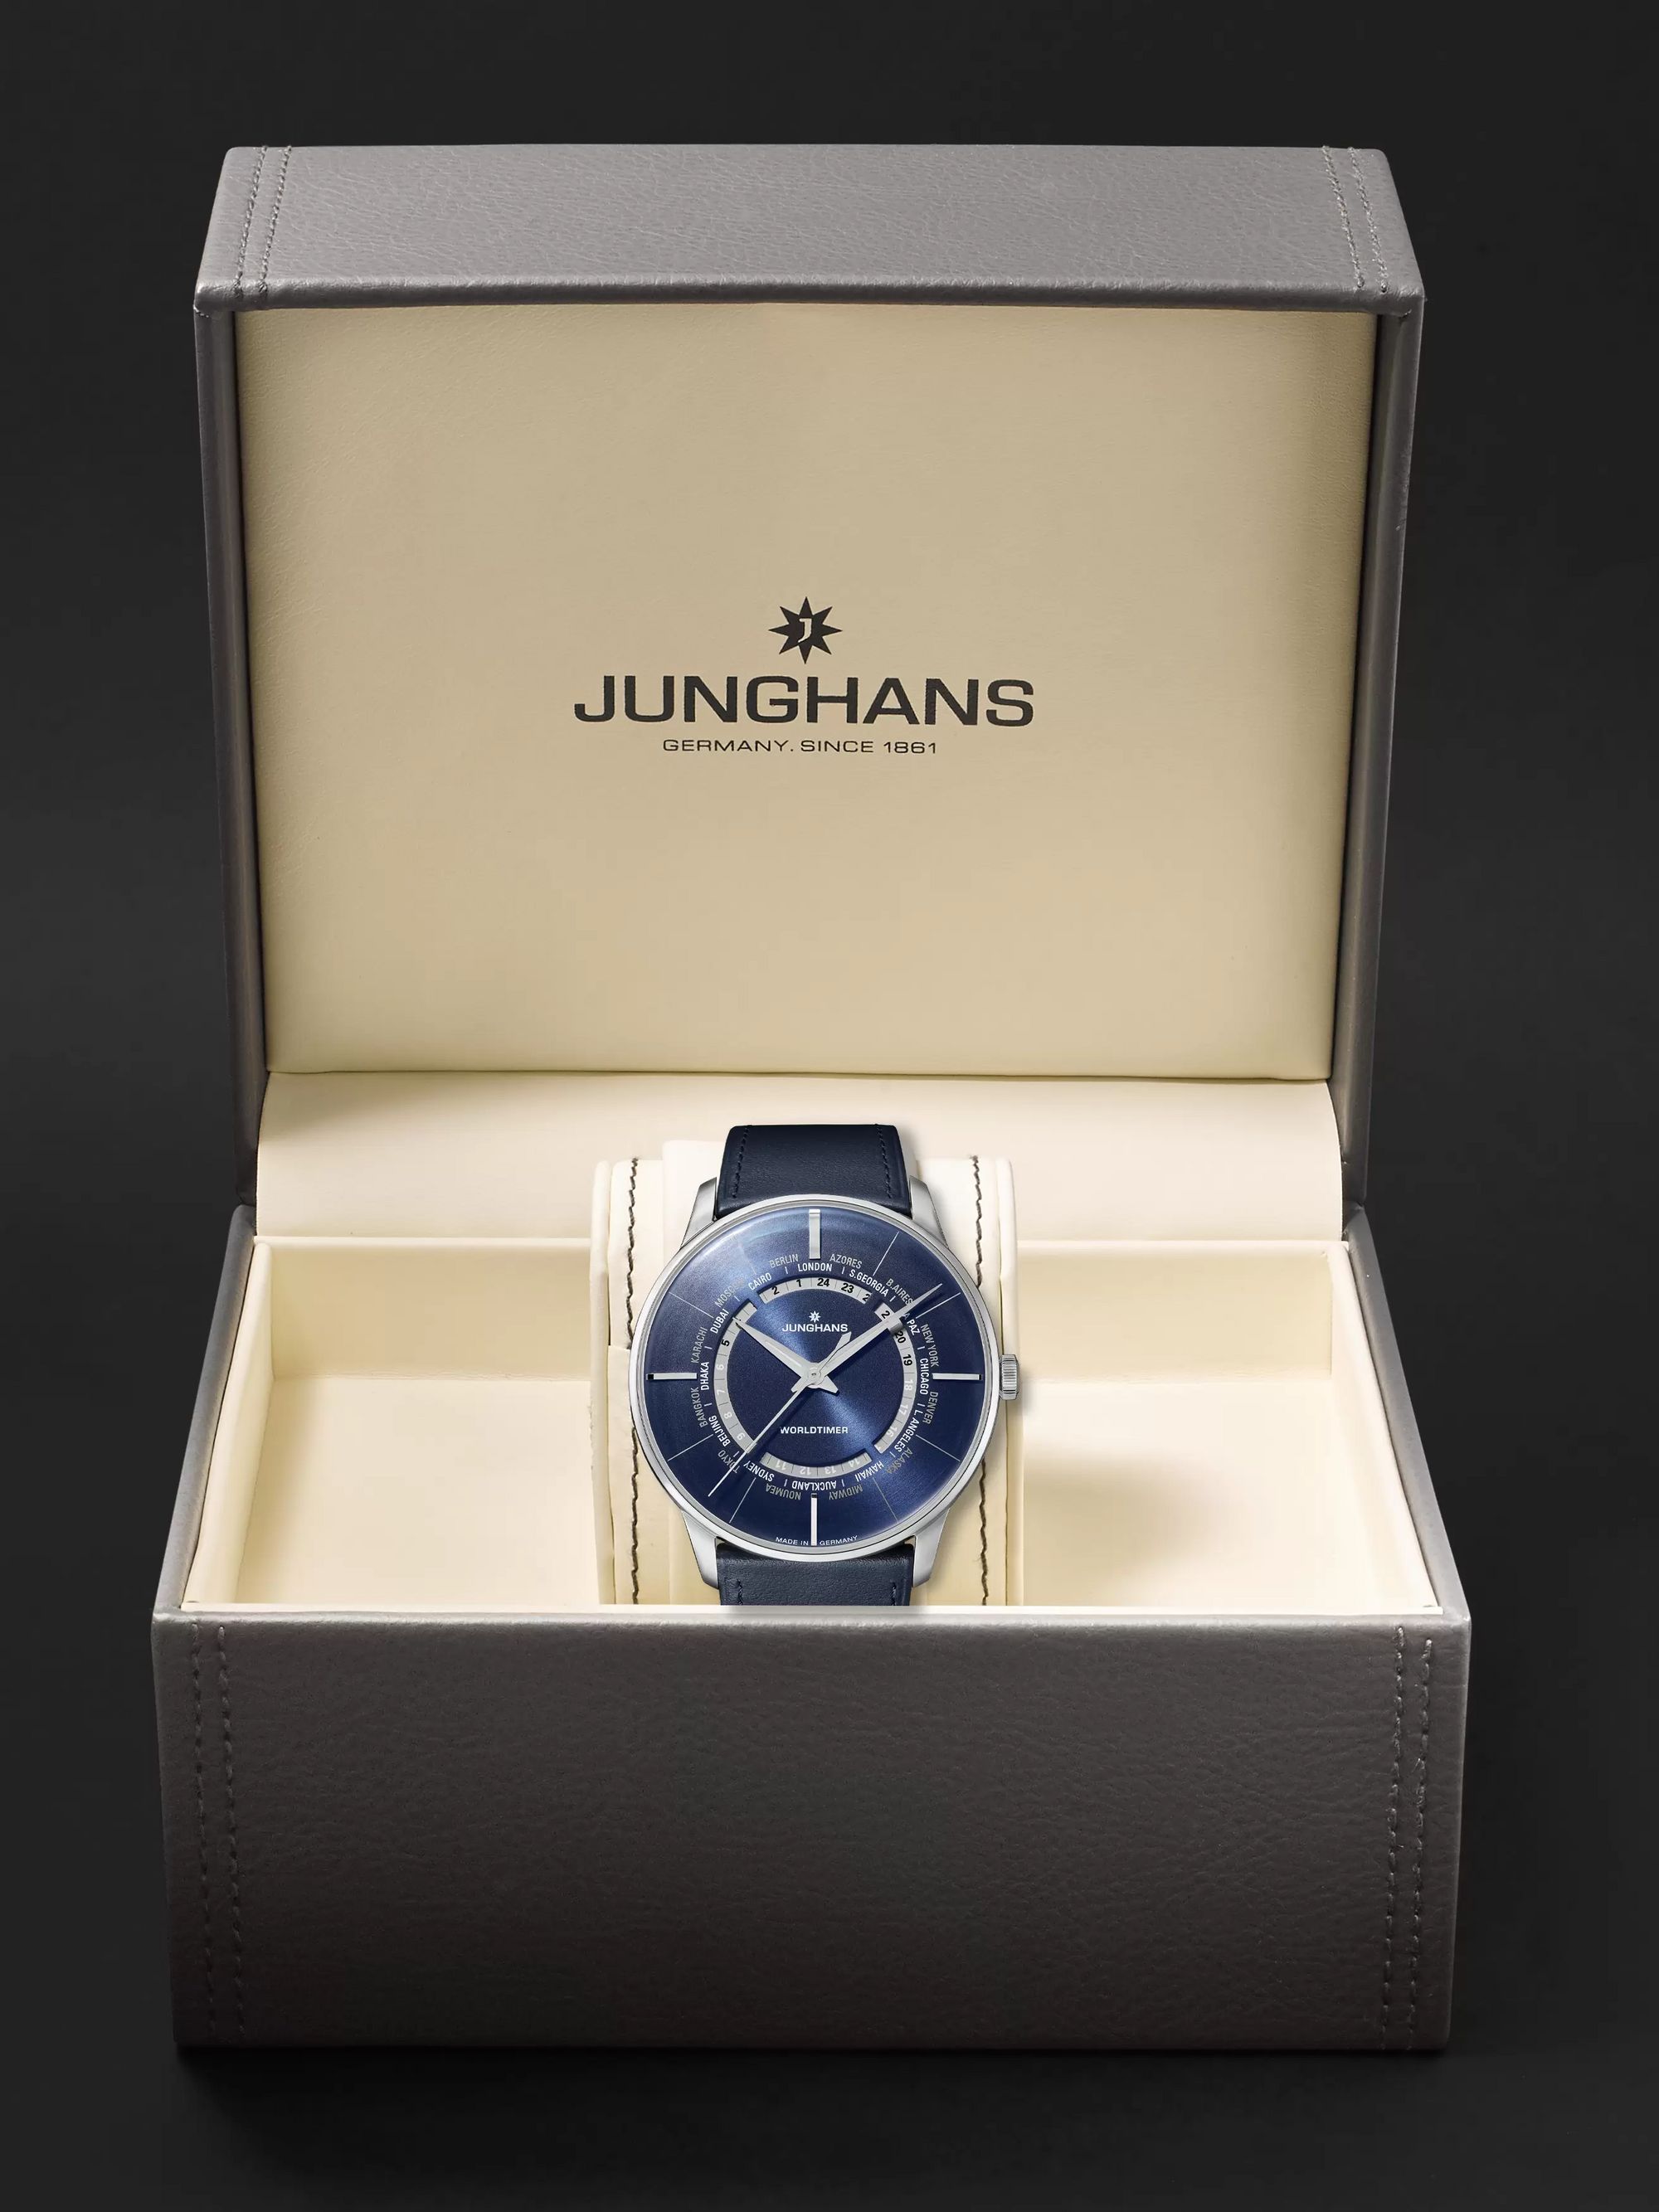 JUNGHANS Meister Worldtimer Automatic 40.4mm PVD-Coated Stainless Steel and Leather Watch, Ref. No. 027/5013.02